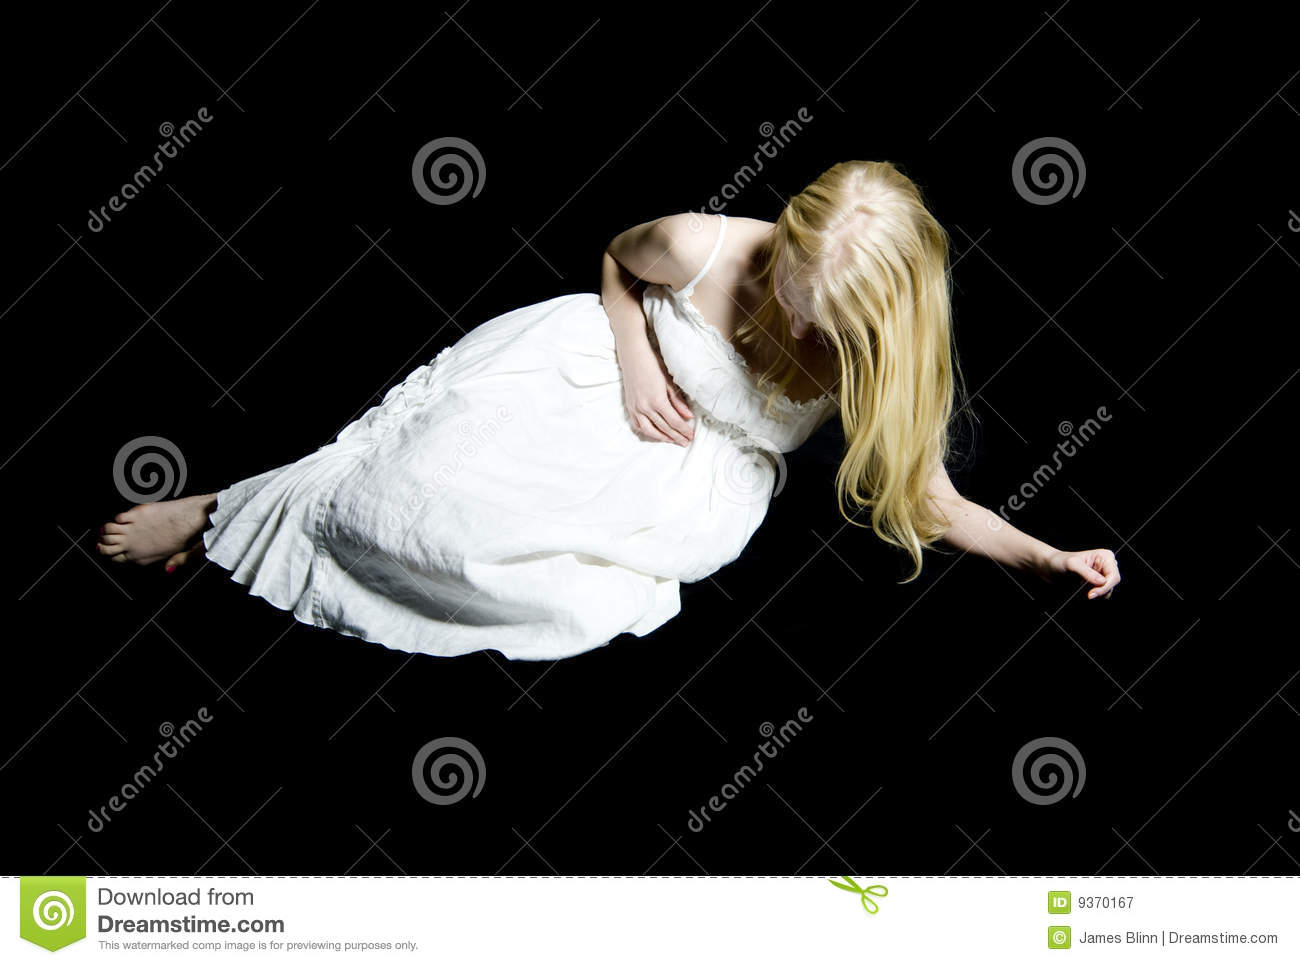 Girl Or Young Woman In Nightgown Clutching Her Abdomen In Pain 